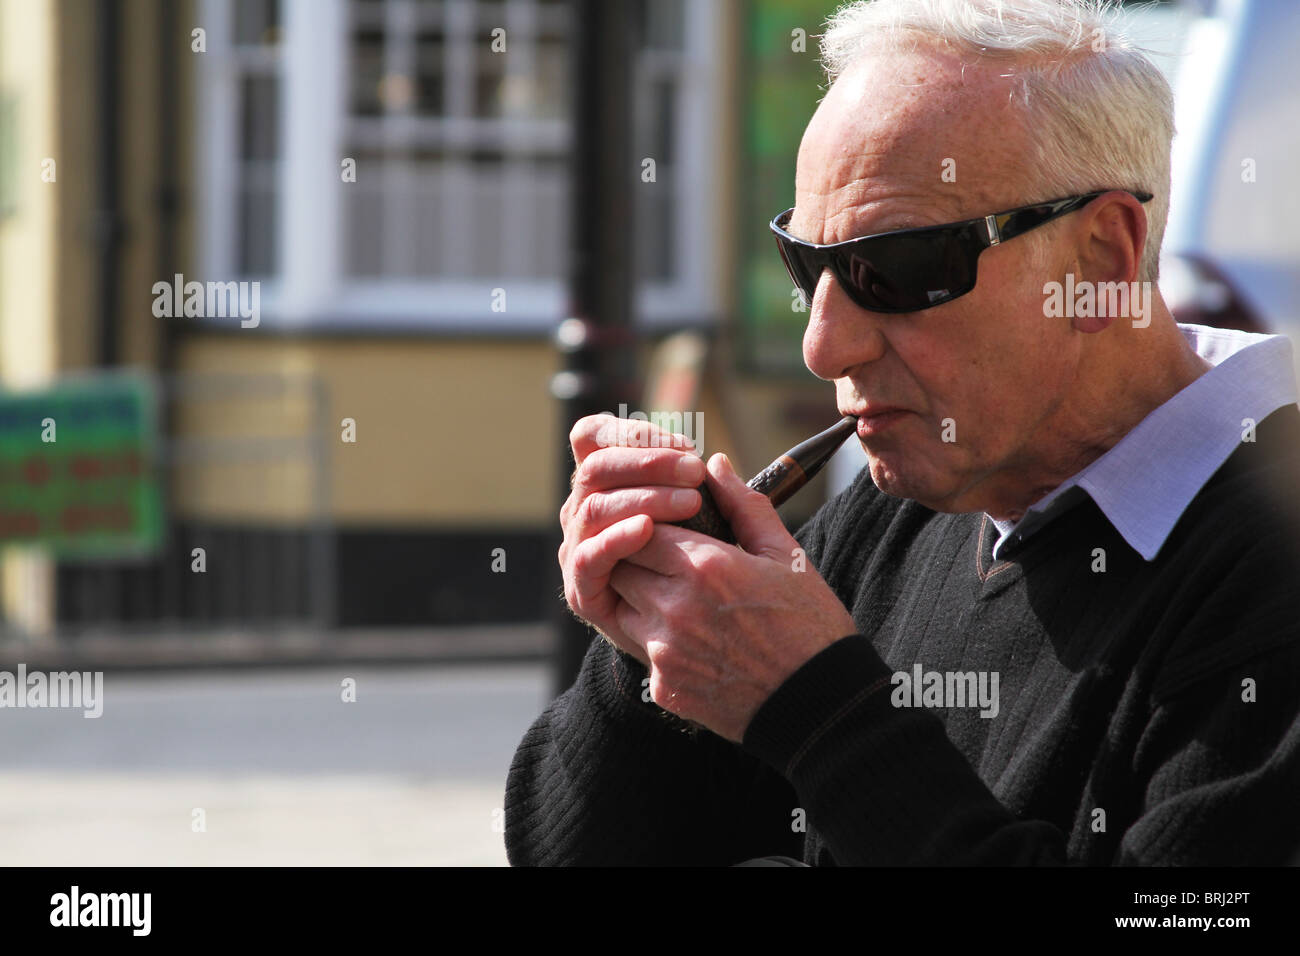 Man lighting a pipe in the street. Stock Photo